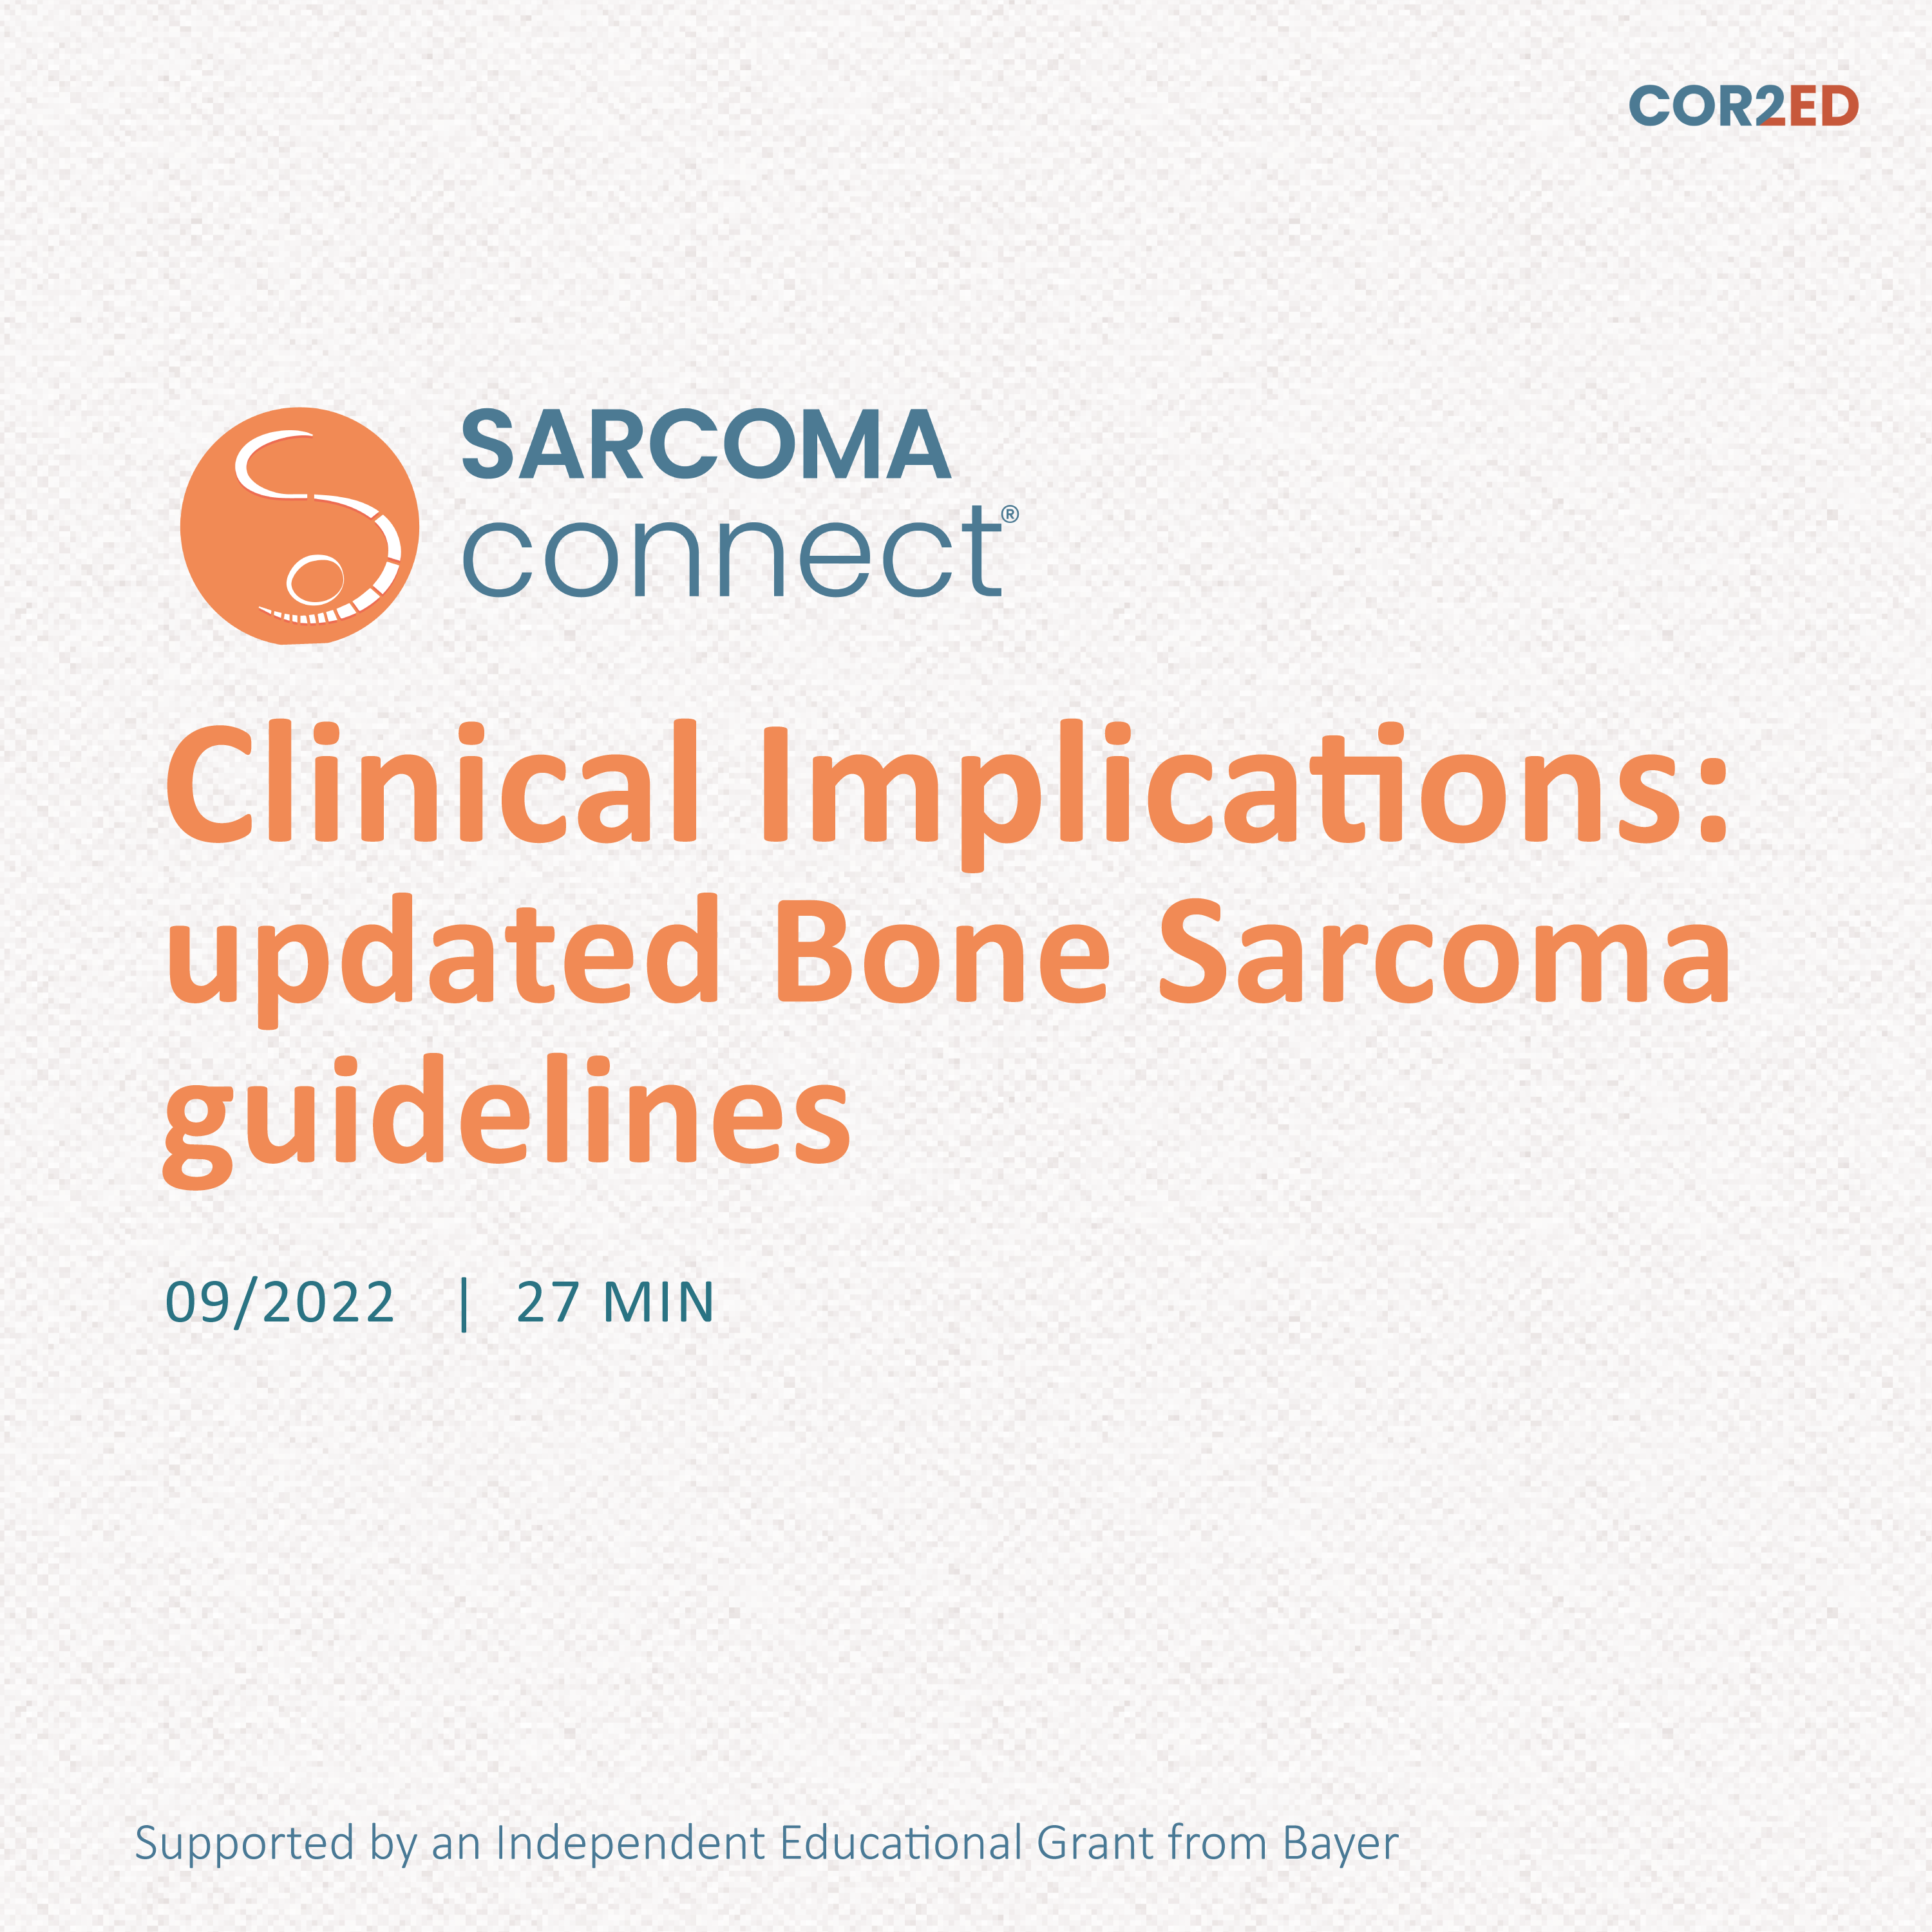 Clinical Implications: updated Bone Sarcoma guidelines